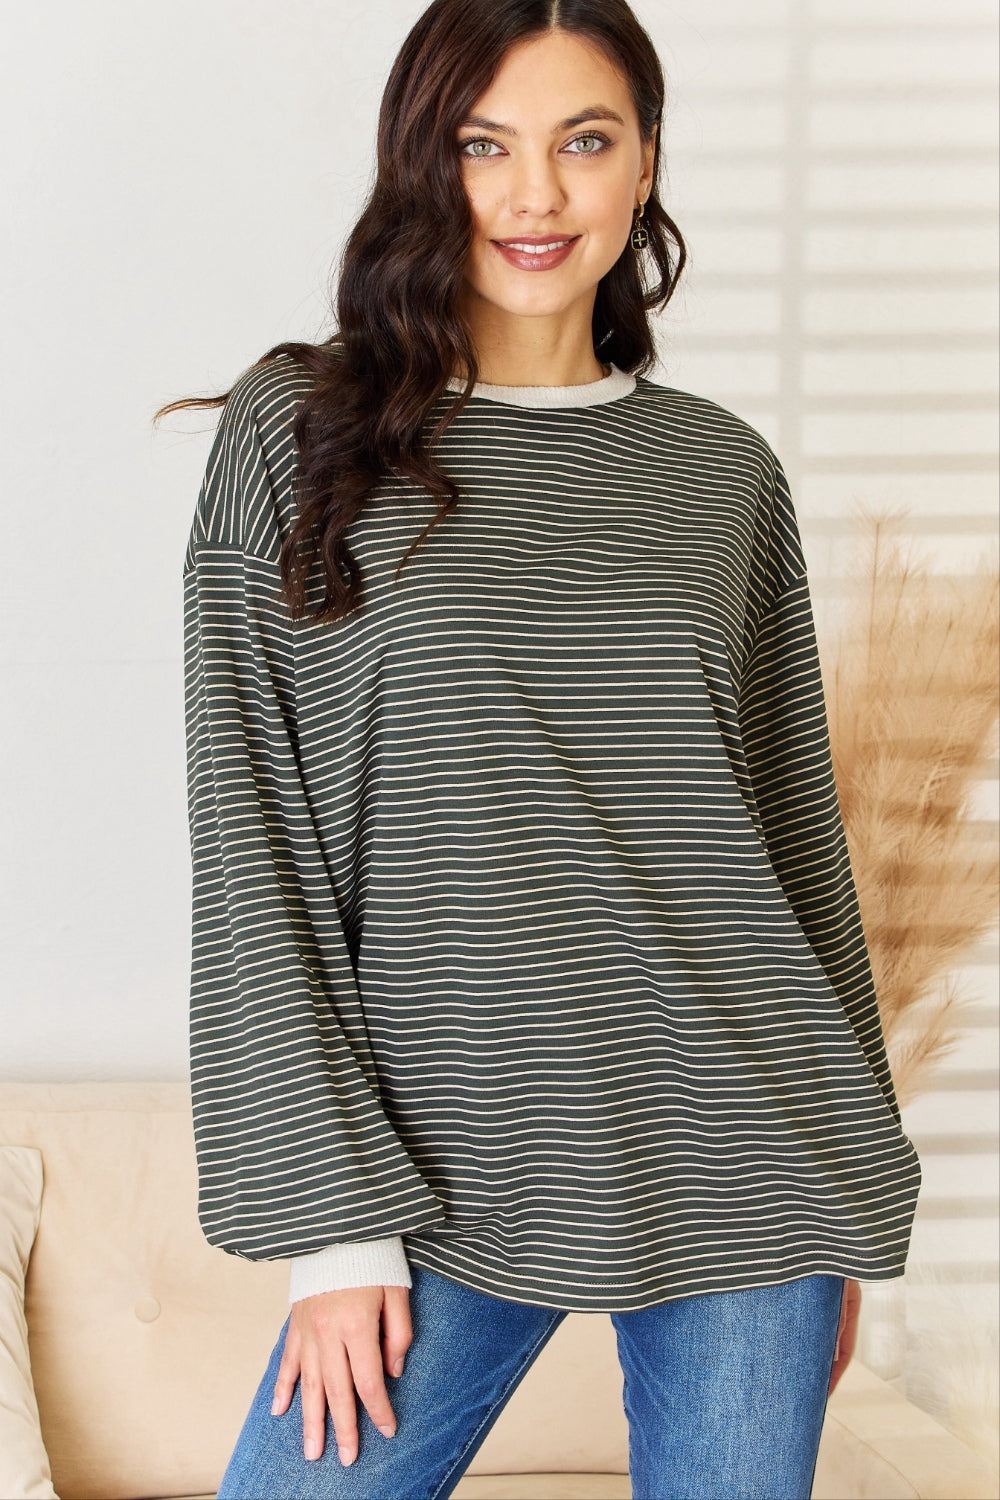 Oversized Striped Long Sleeve Top - Inspired Eye Boutique